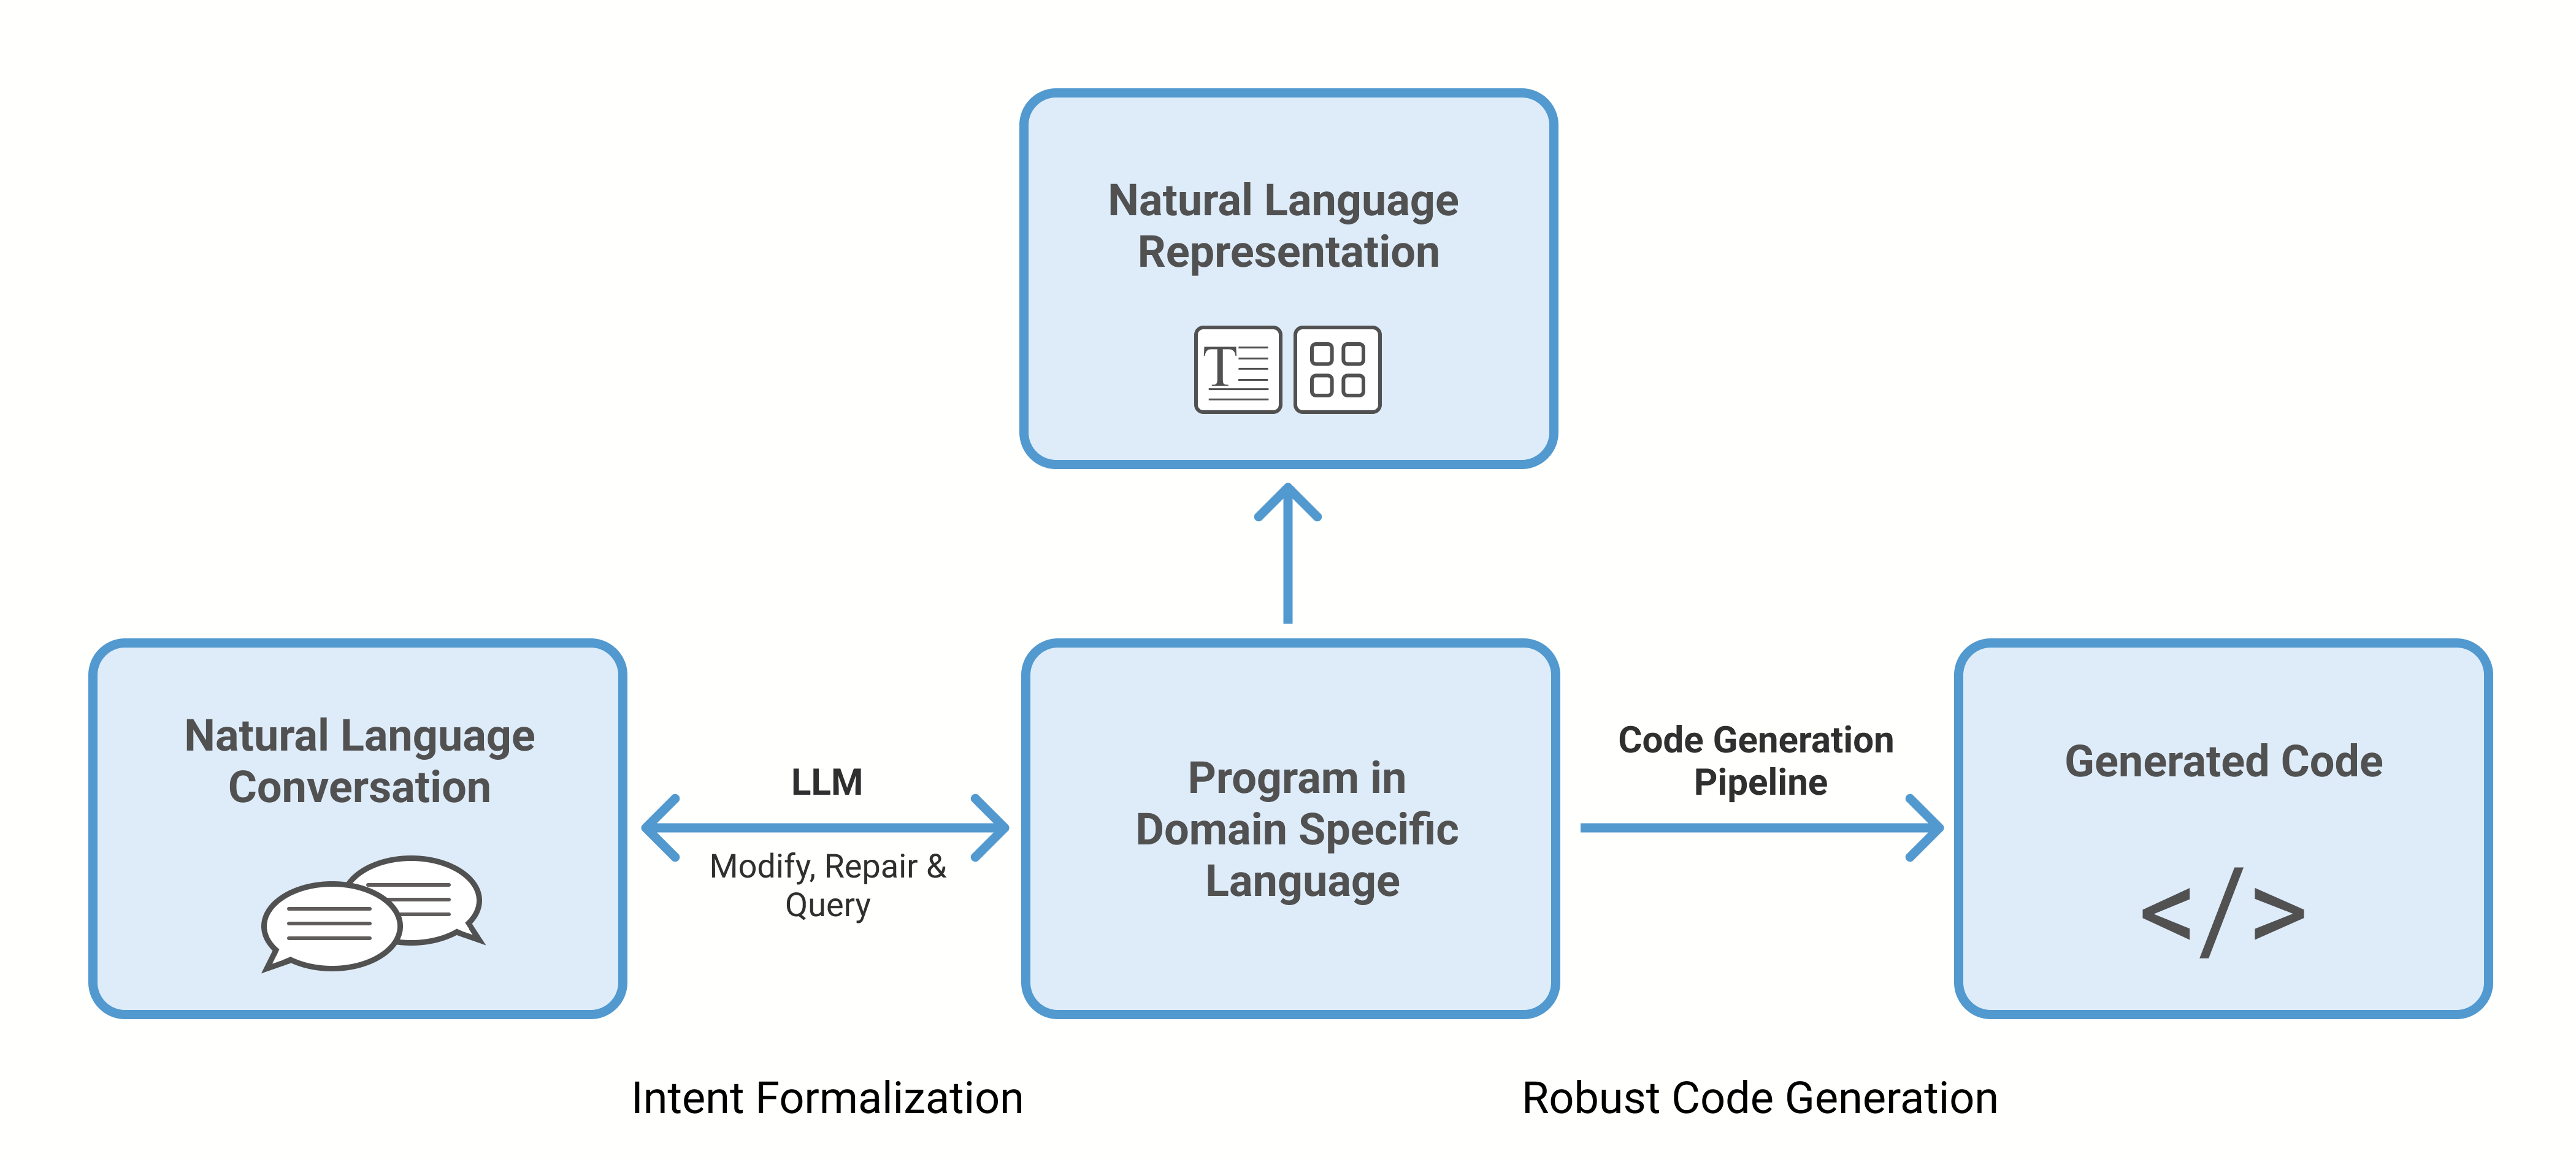 Flowchart showing natural language is transformed into a program in domain specific language using an LLM. This step is called Intent formalization. The user is able to modify, repair and query. The Program in DSL is then converted into natural language representation that can be in text or visual formats. The Program in DSL is also separatedly converted into Code via the Code Generation pipeline. This step is called Robust Code Generation. 